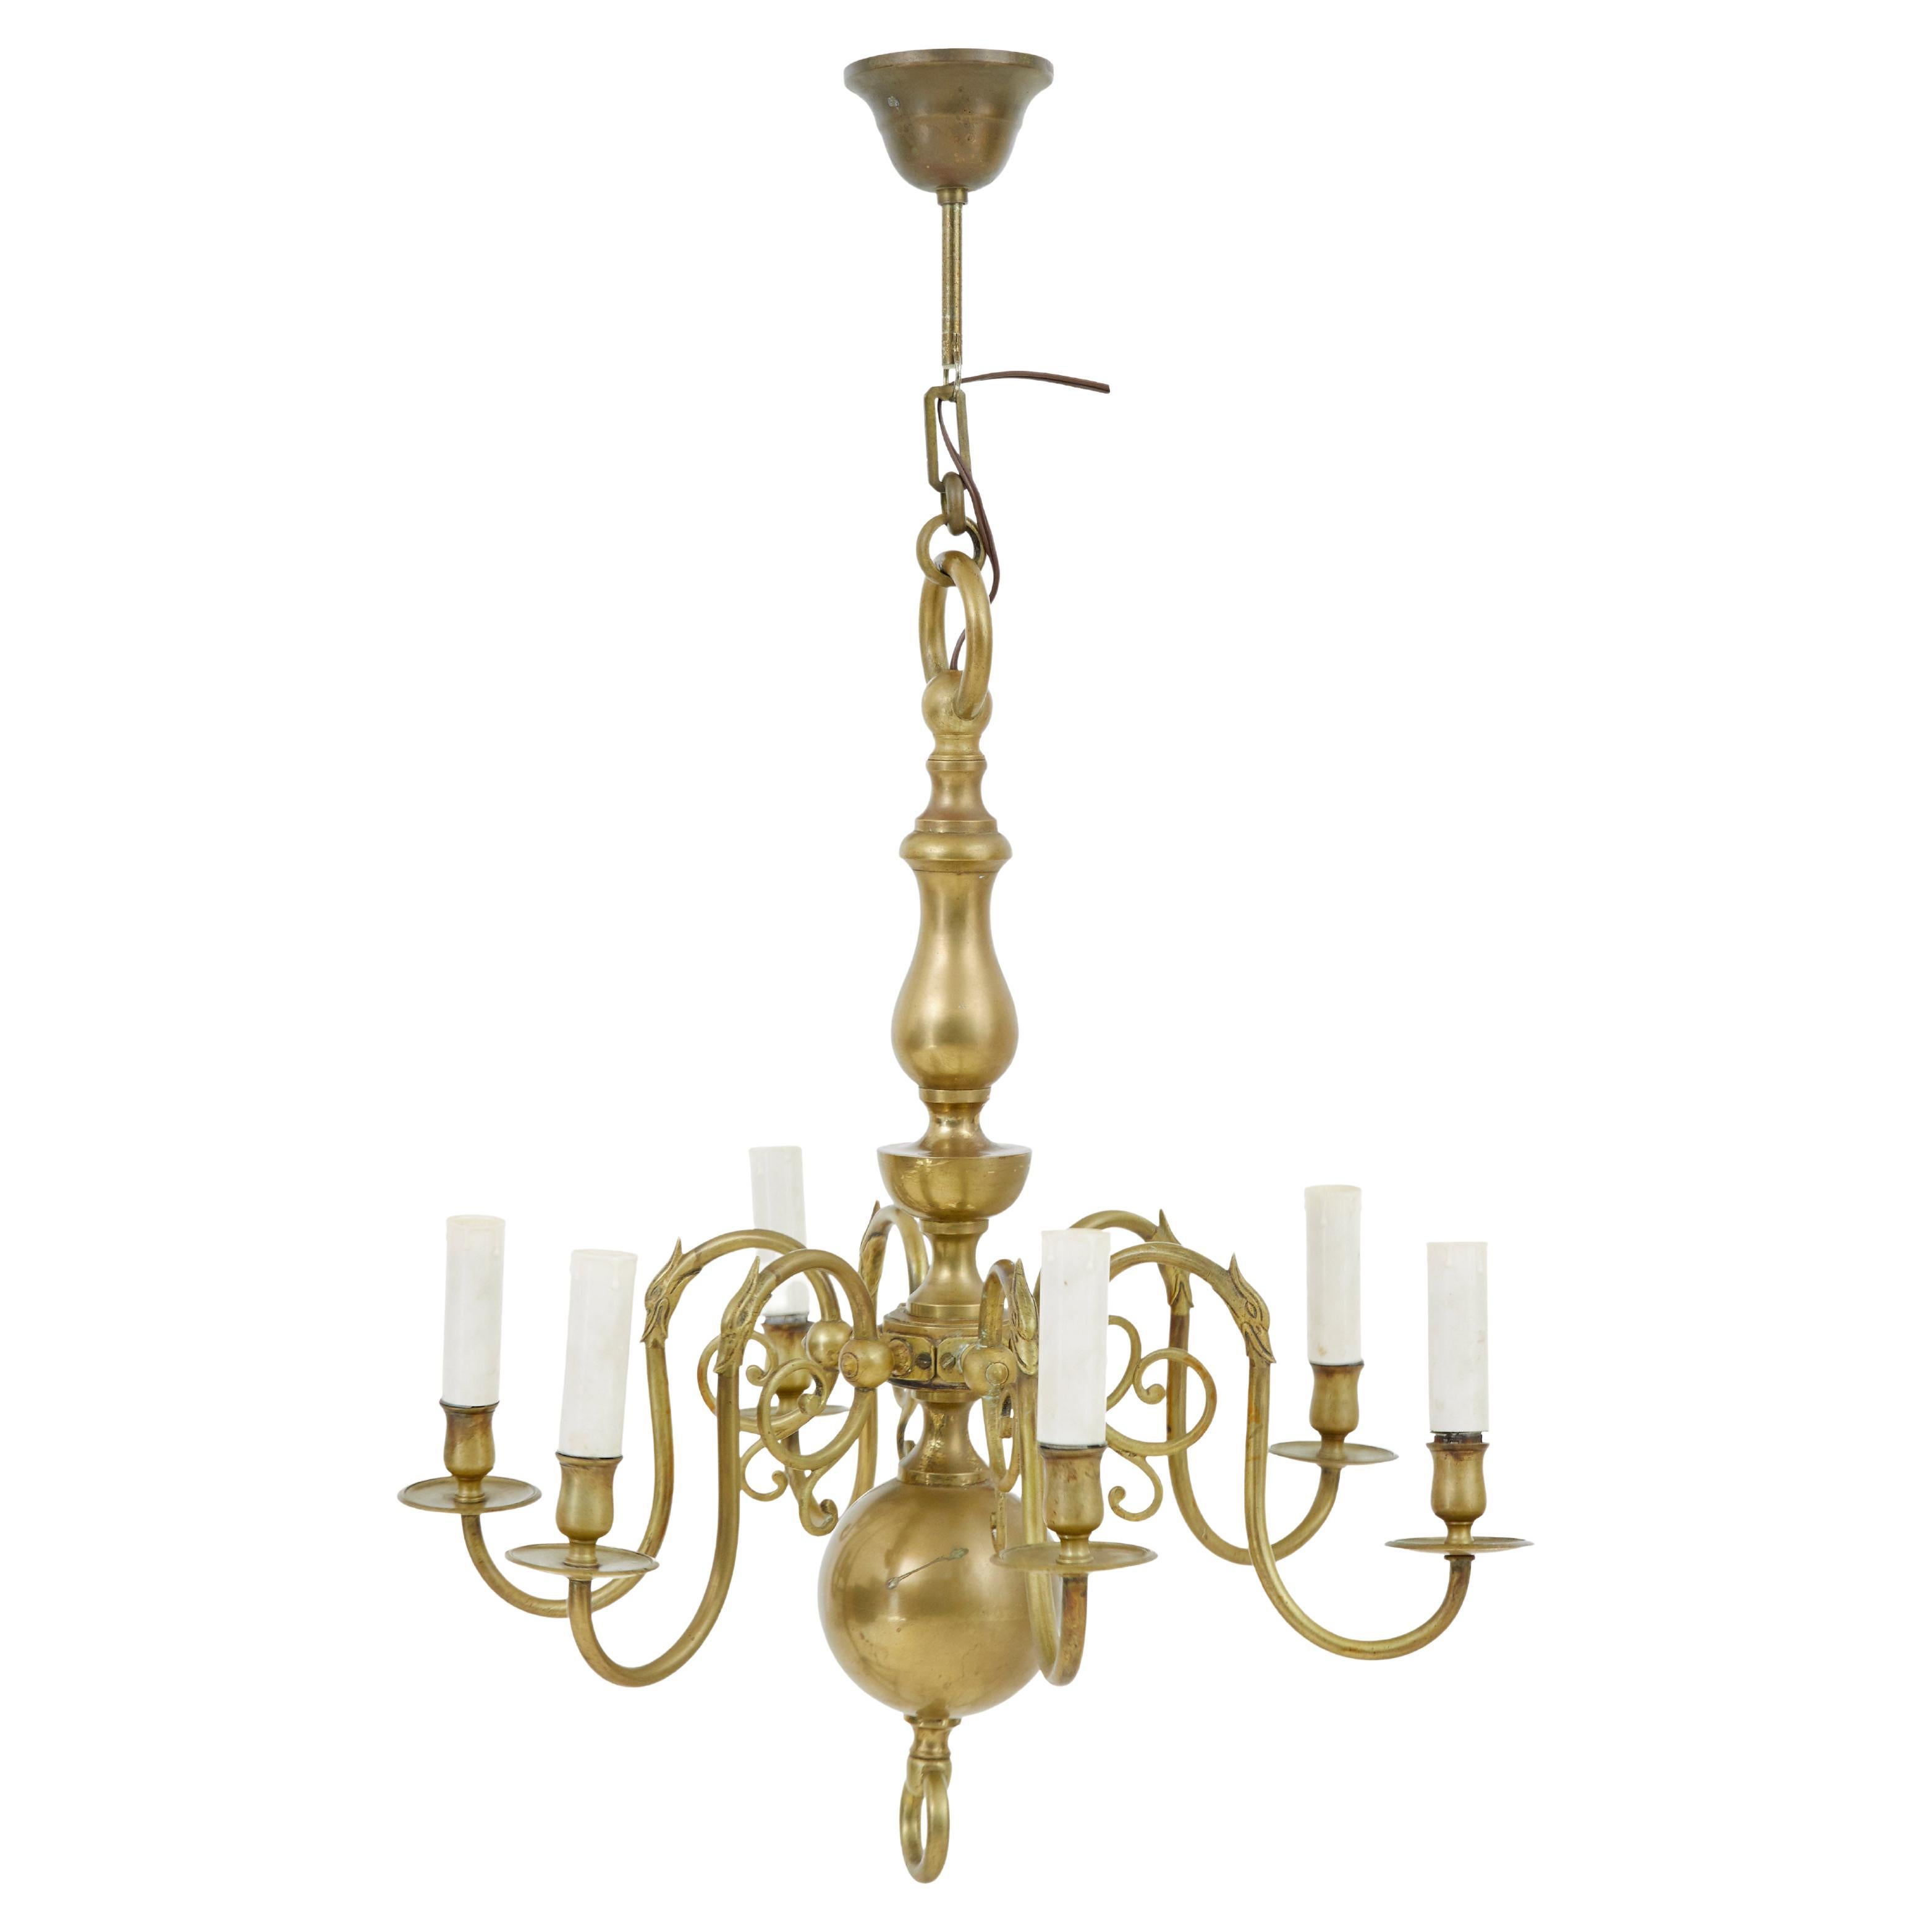 Early 20th century 6 arm brass chandelier For Sale